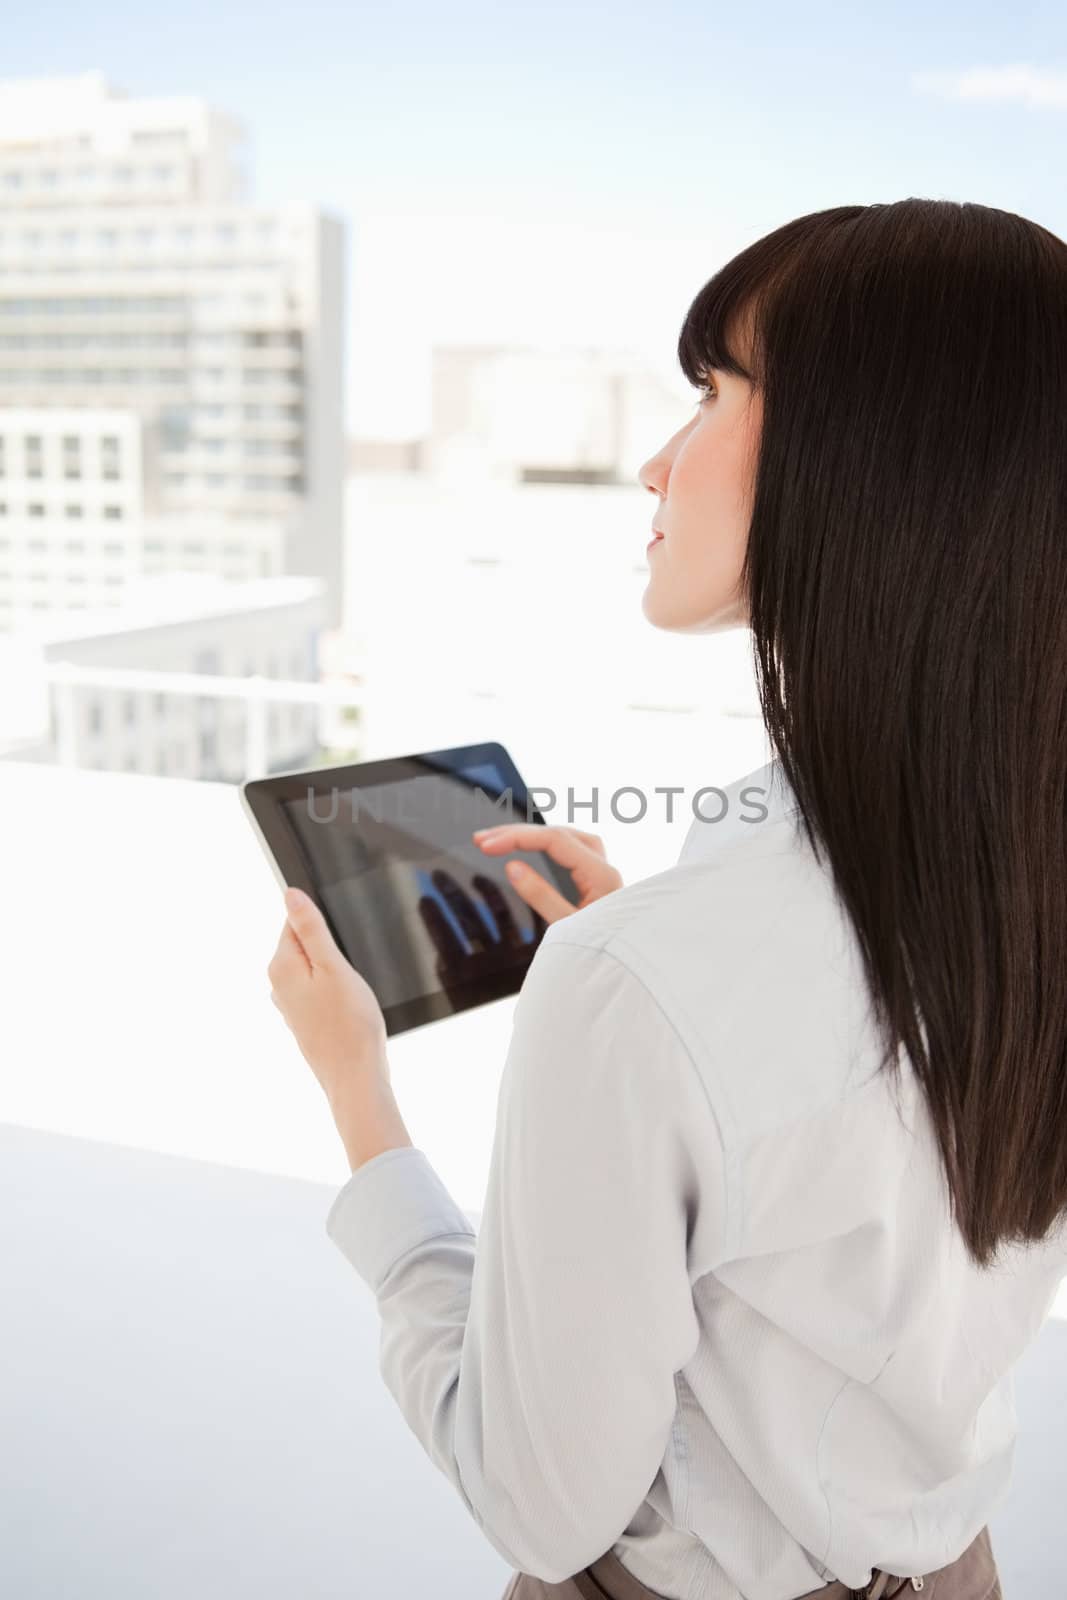 A business woman uses a tablet pc in her office as she looks up